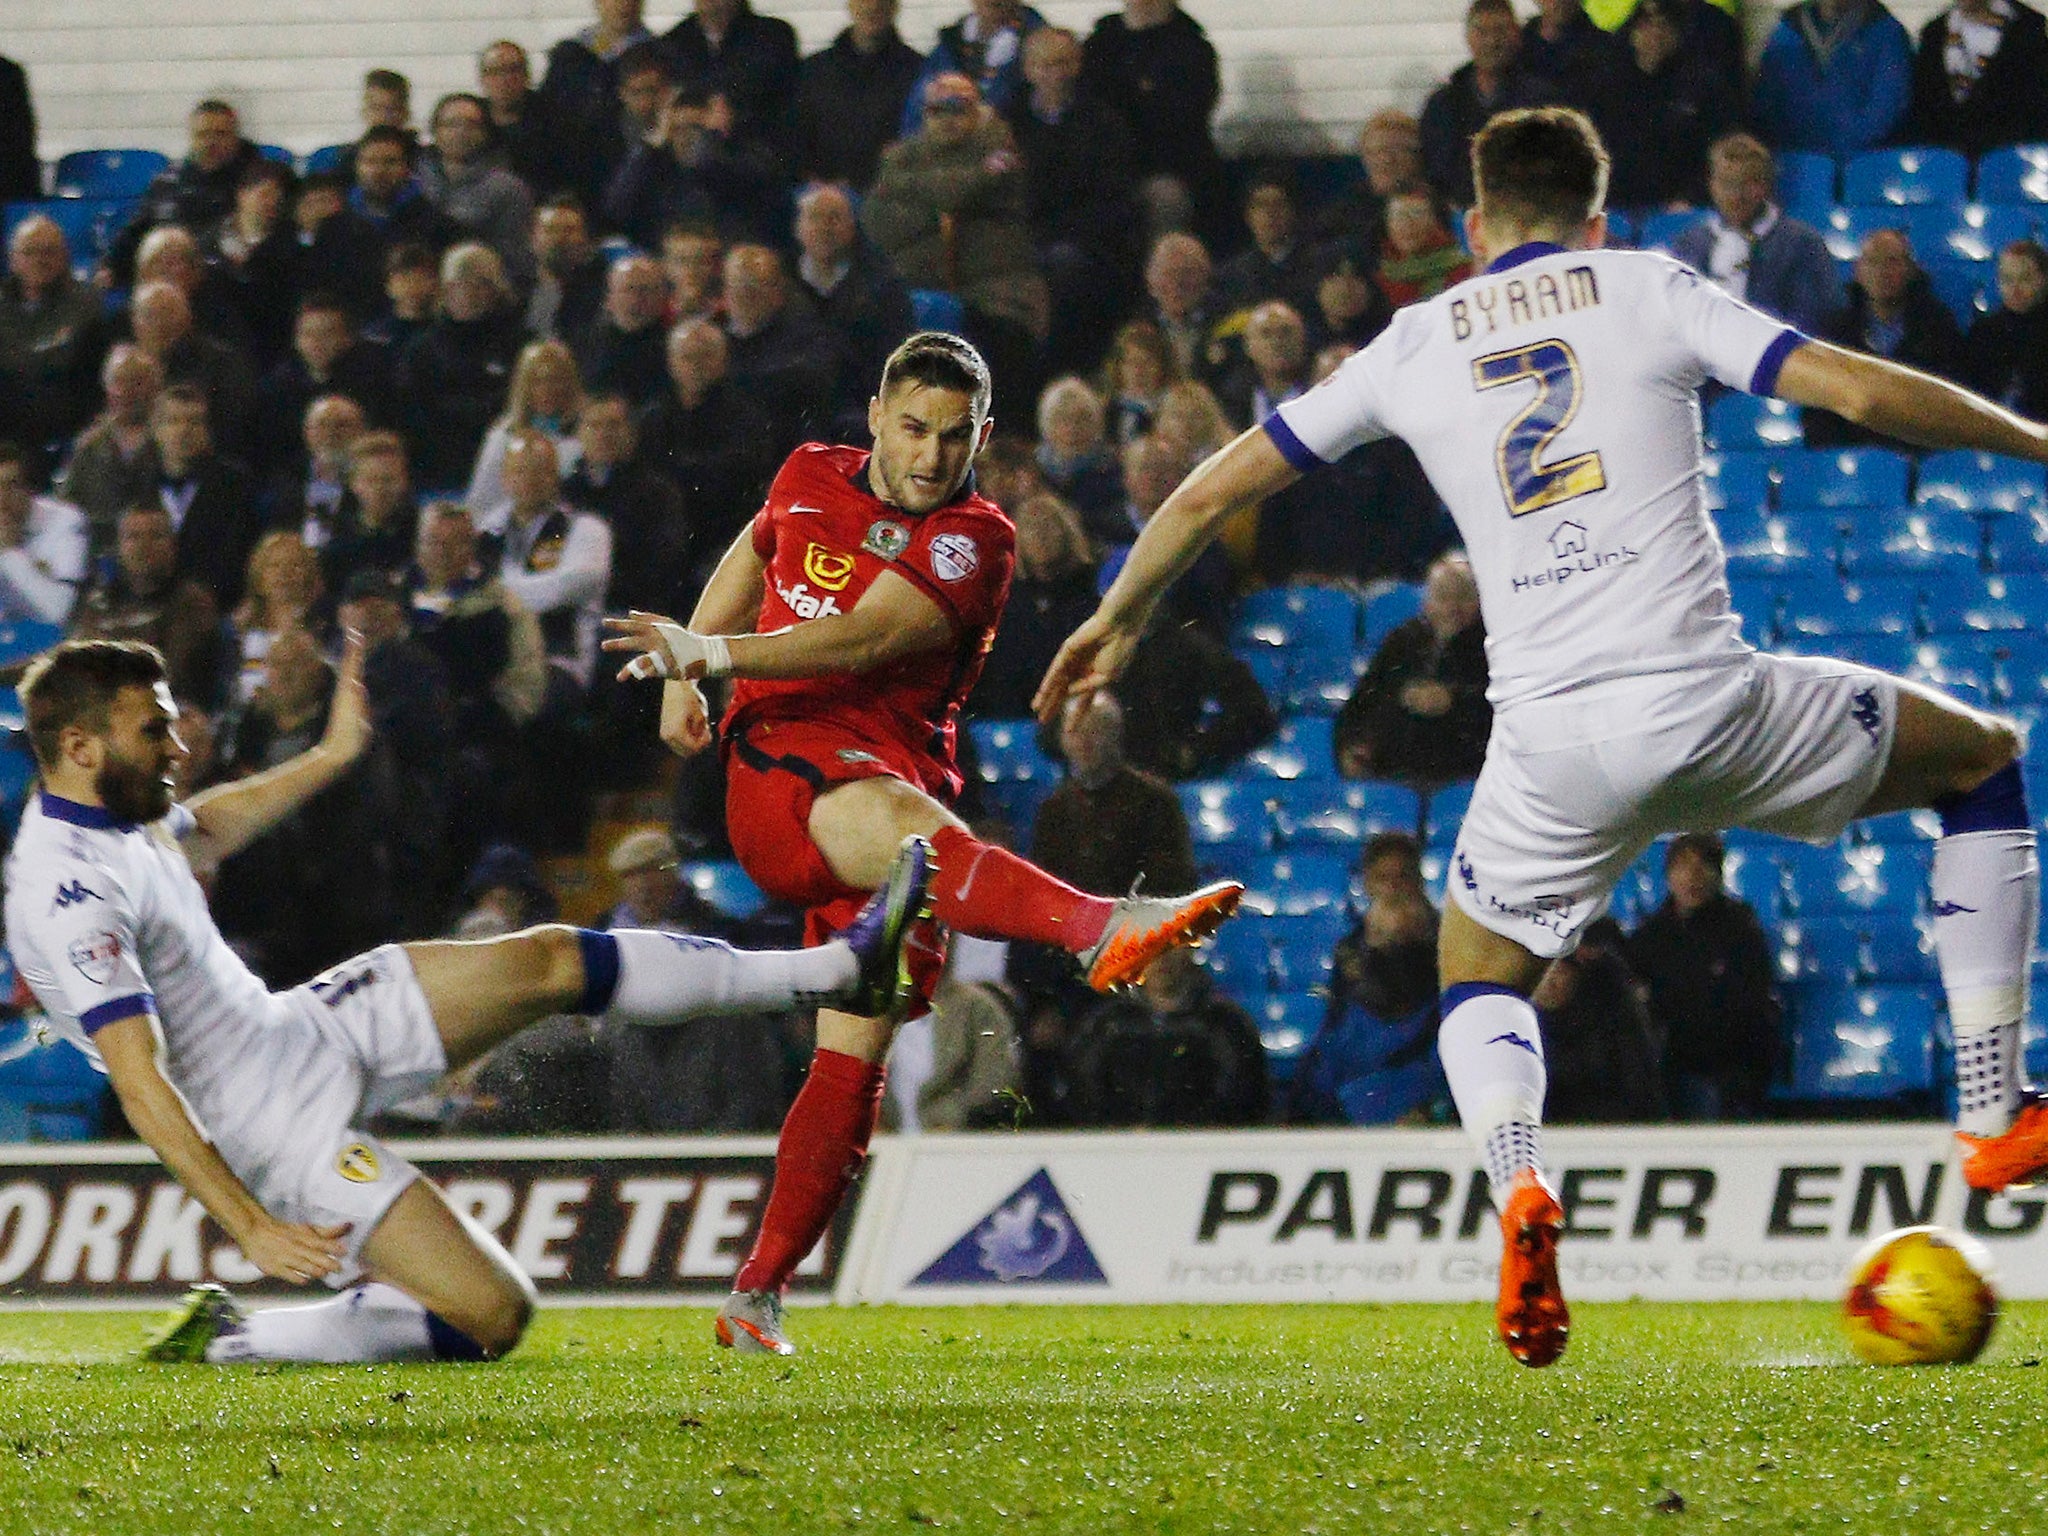 Blackburn’s Craig Conway puts his side into the lead after 18 seconds at Elland Road